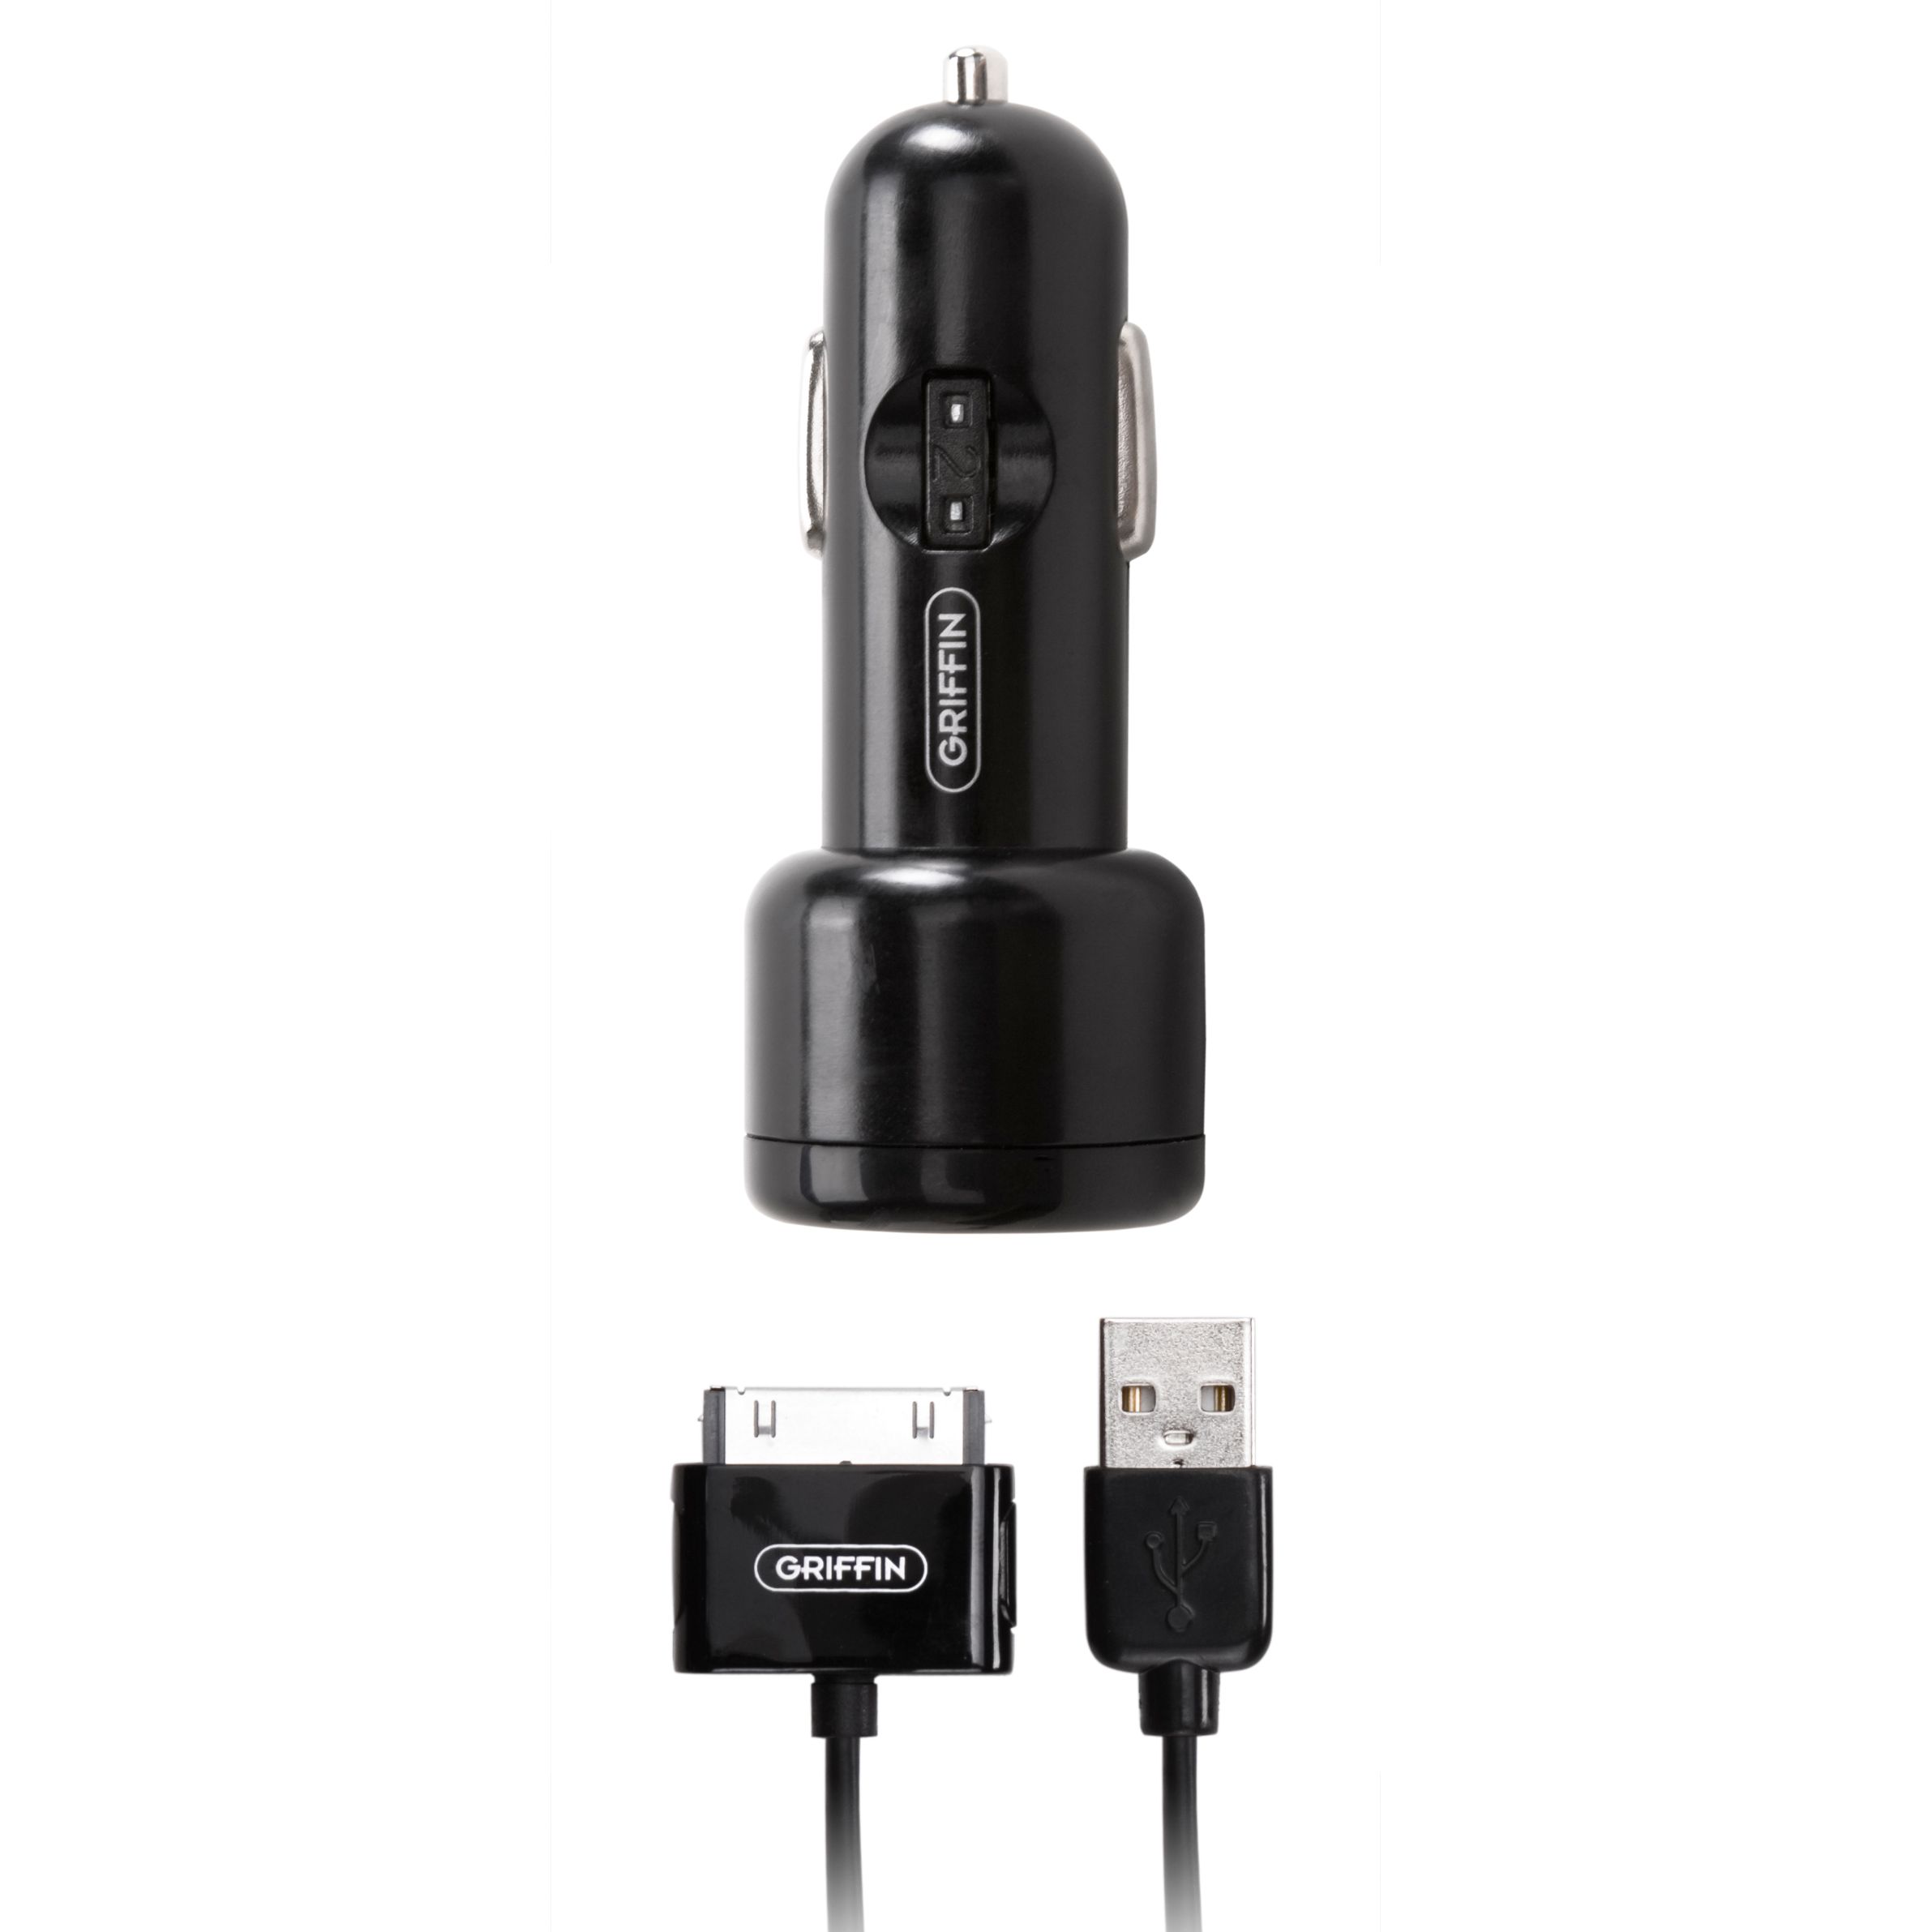 Griffin PowerJolt USB Car Charger for iPhone/iPod